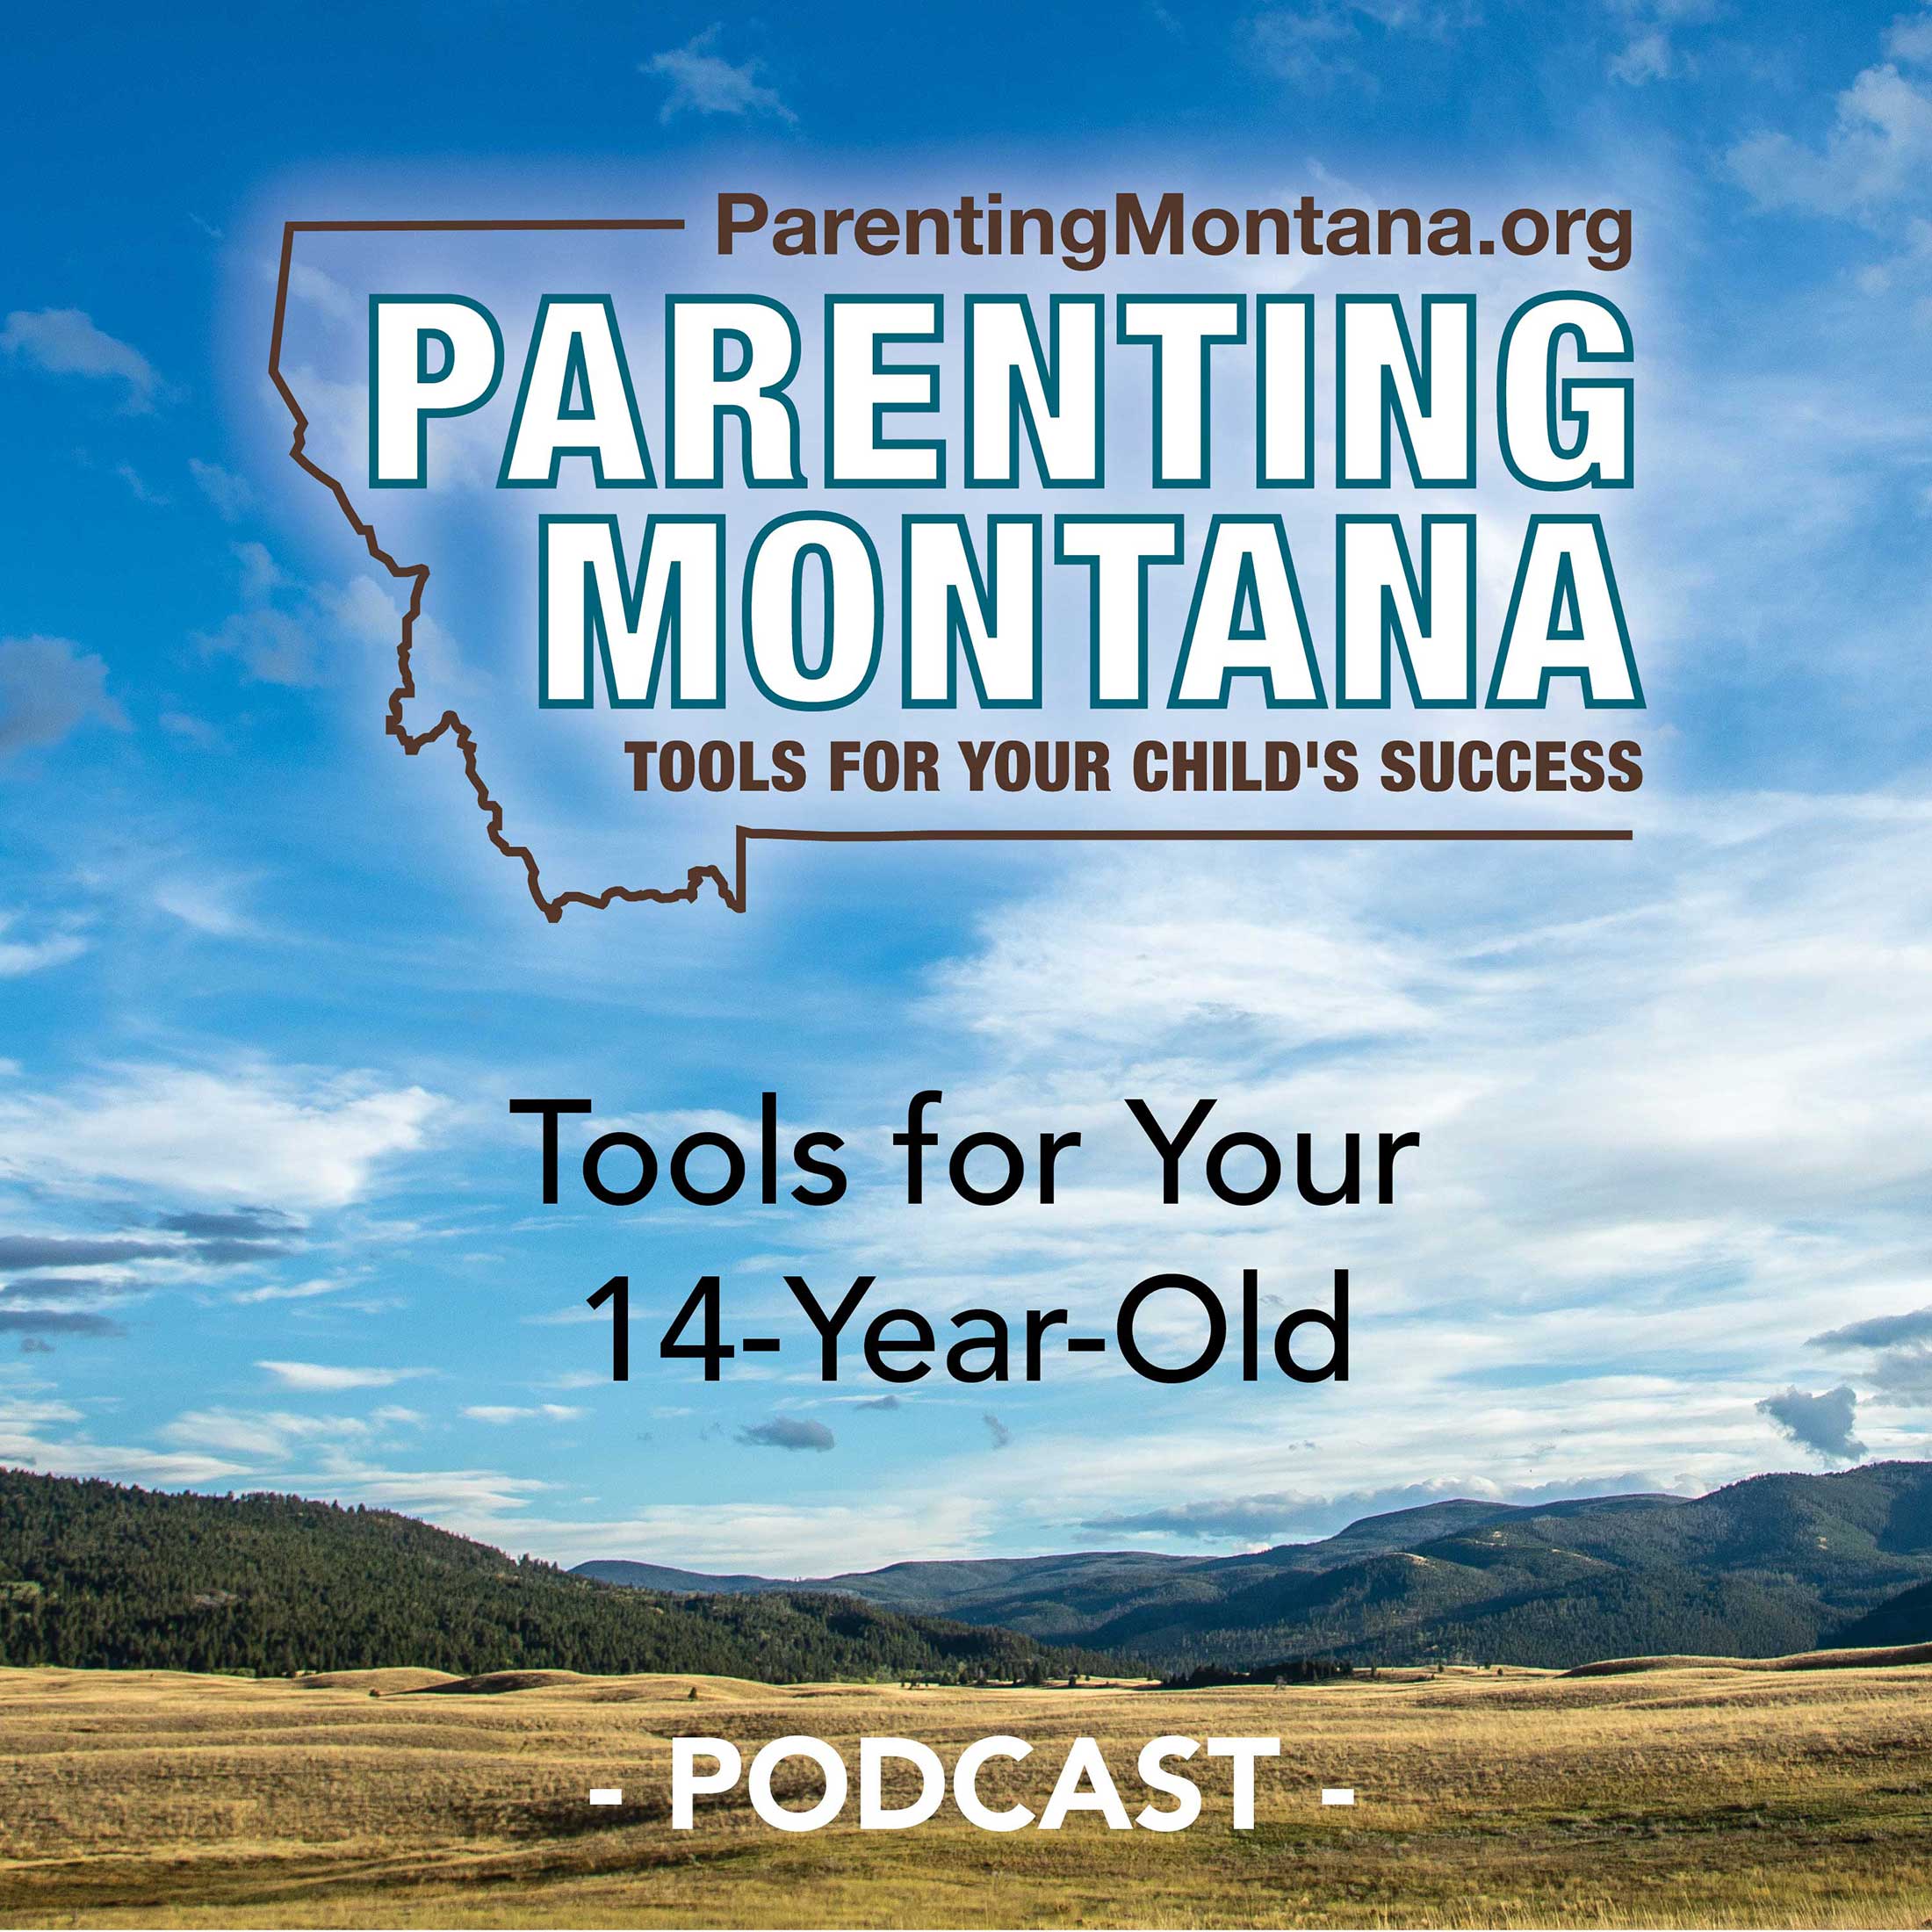 Artwork for podcast 14-Year-Old Parenting Montana Tools